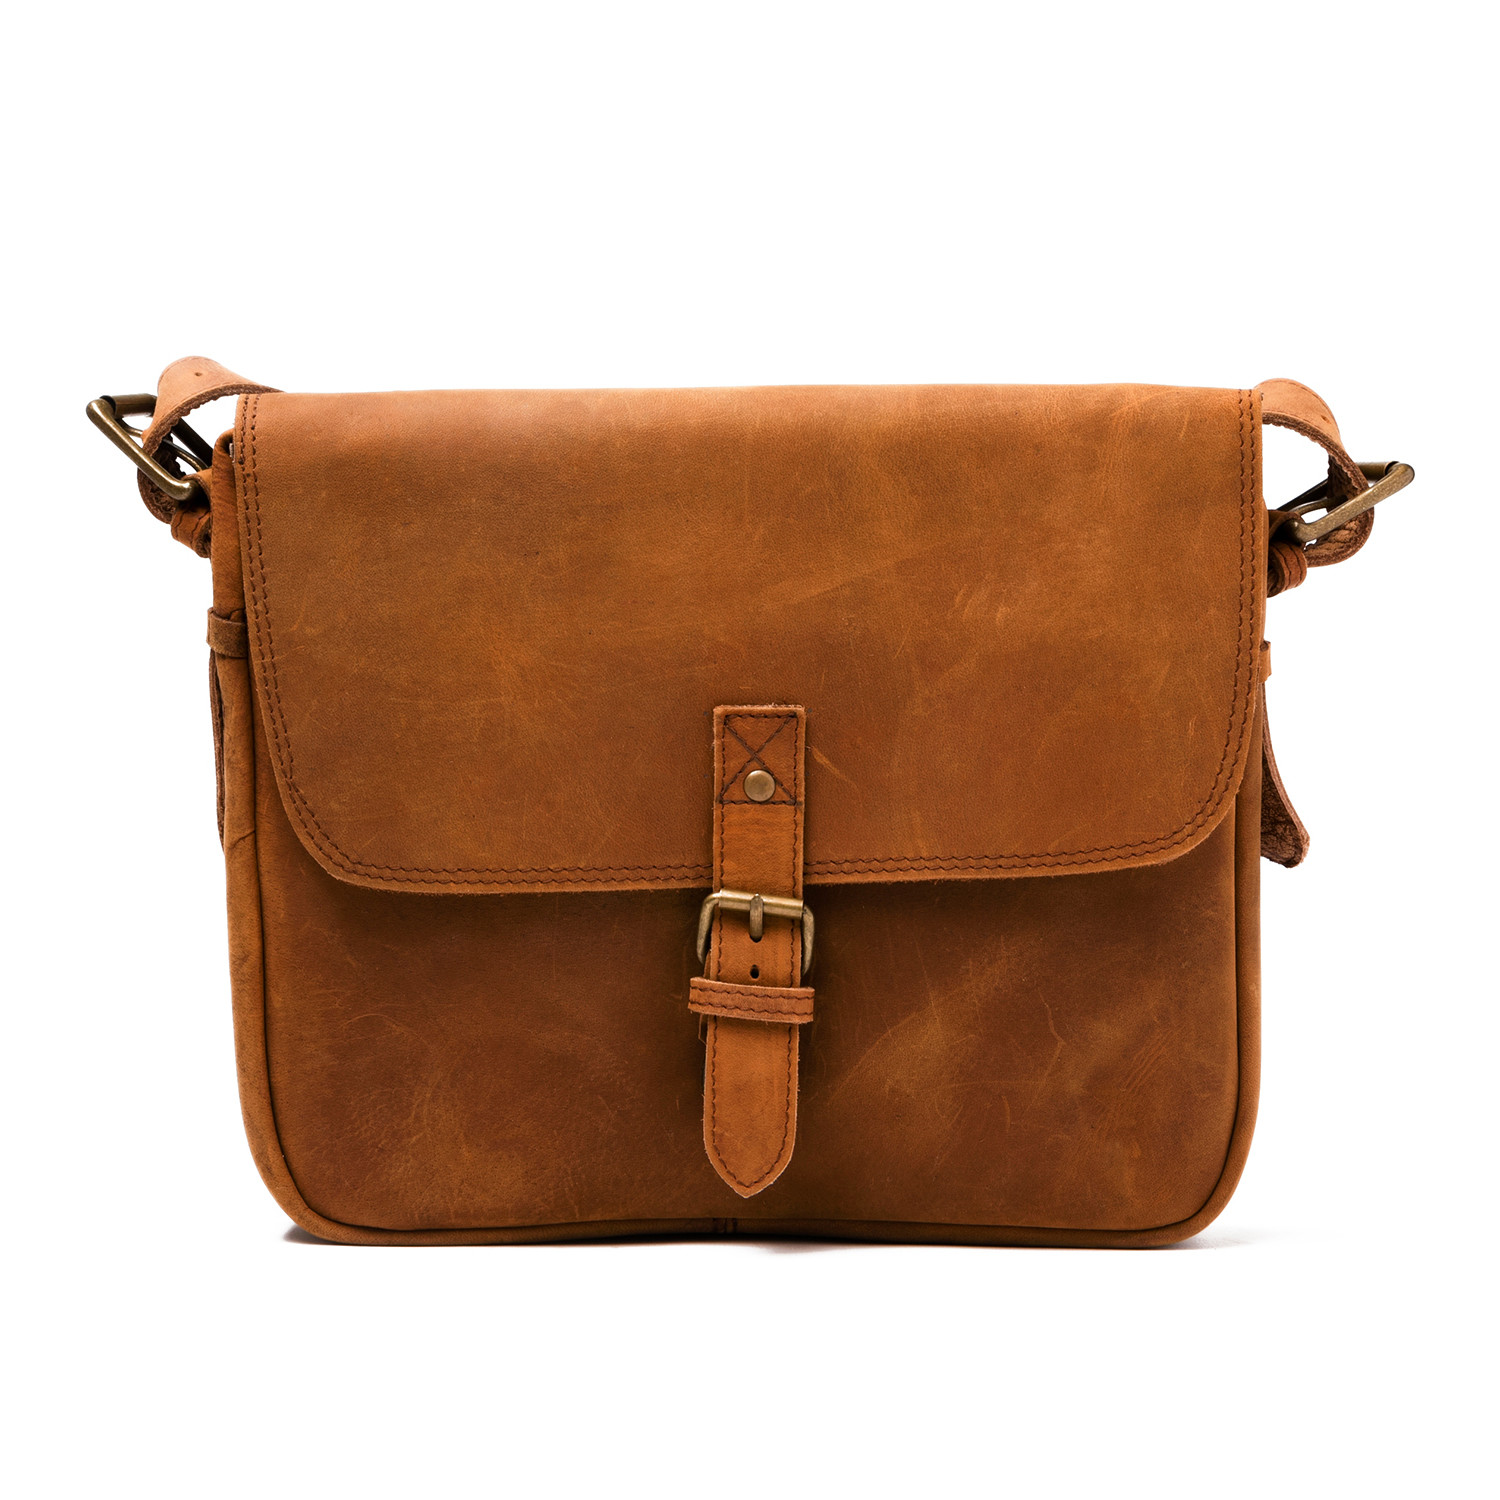 Distressed Leather Cross Body Messenger Bag Large // Brown - HIDES ...